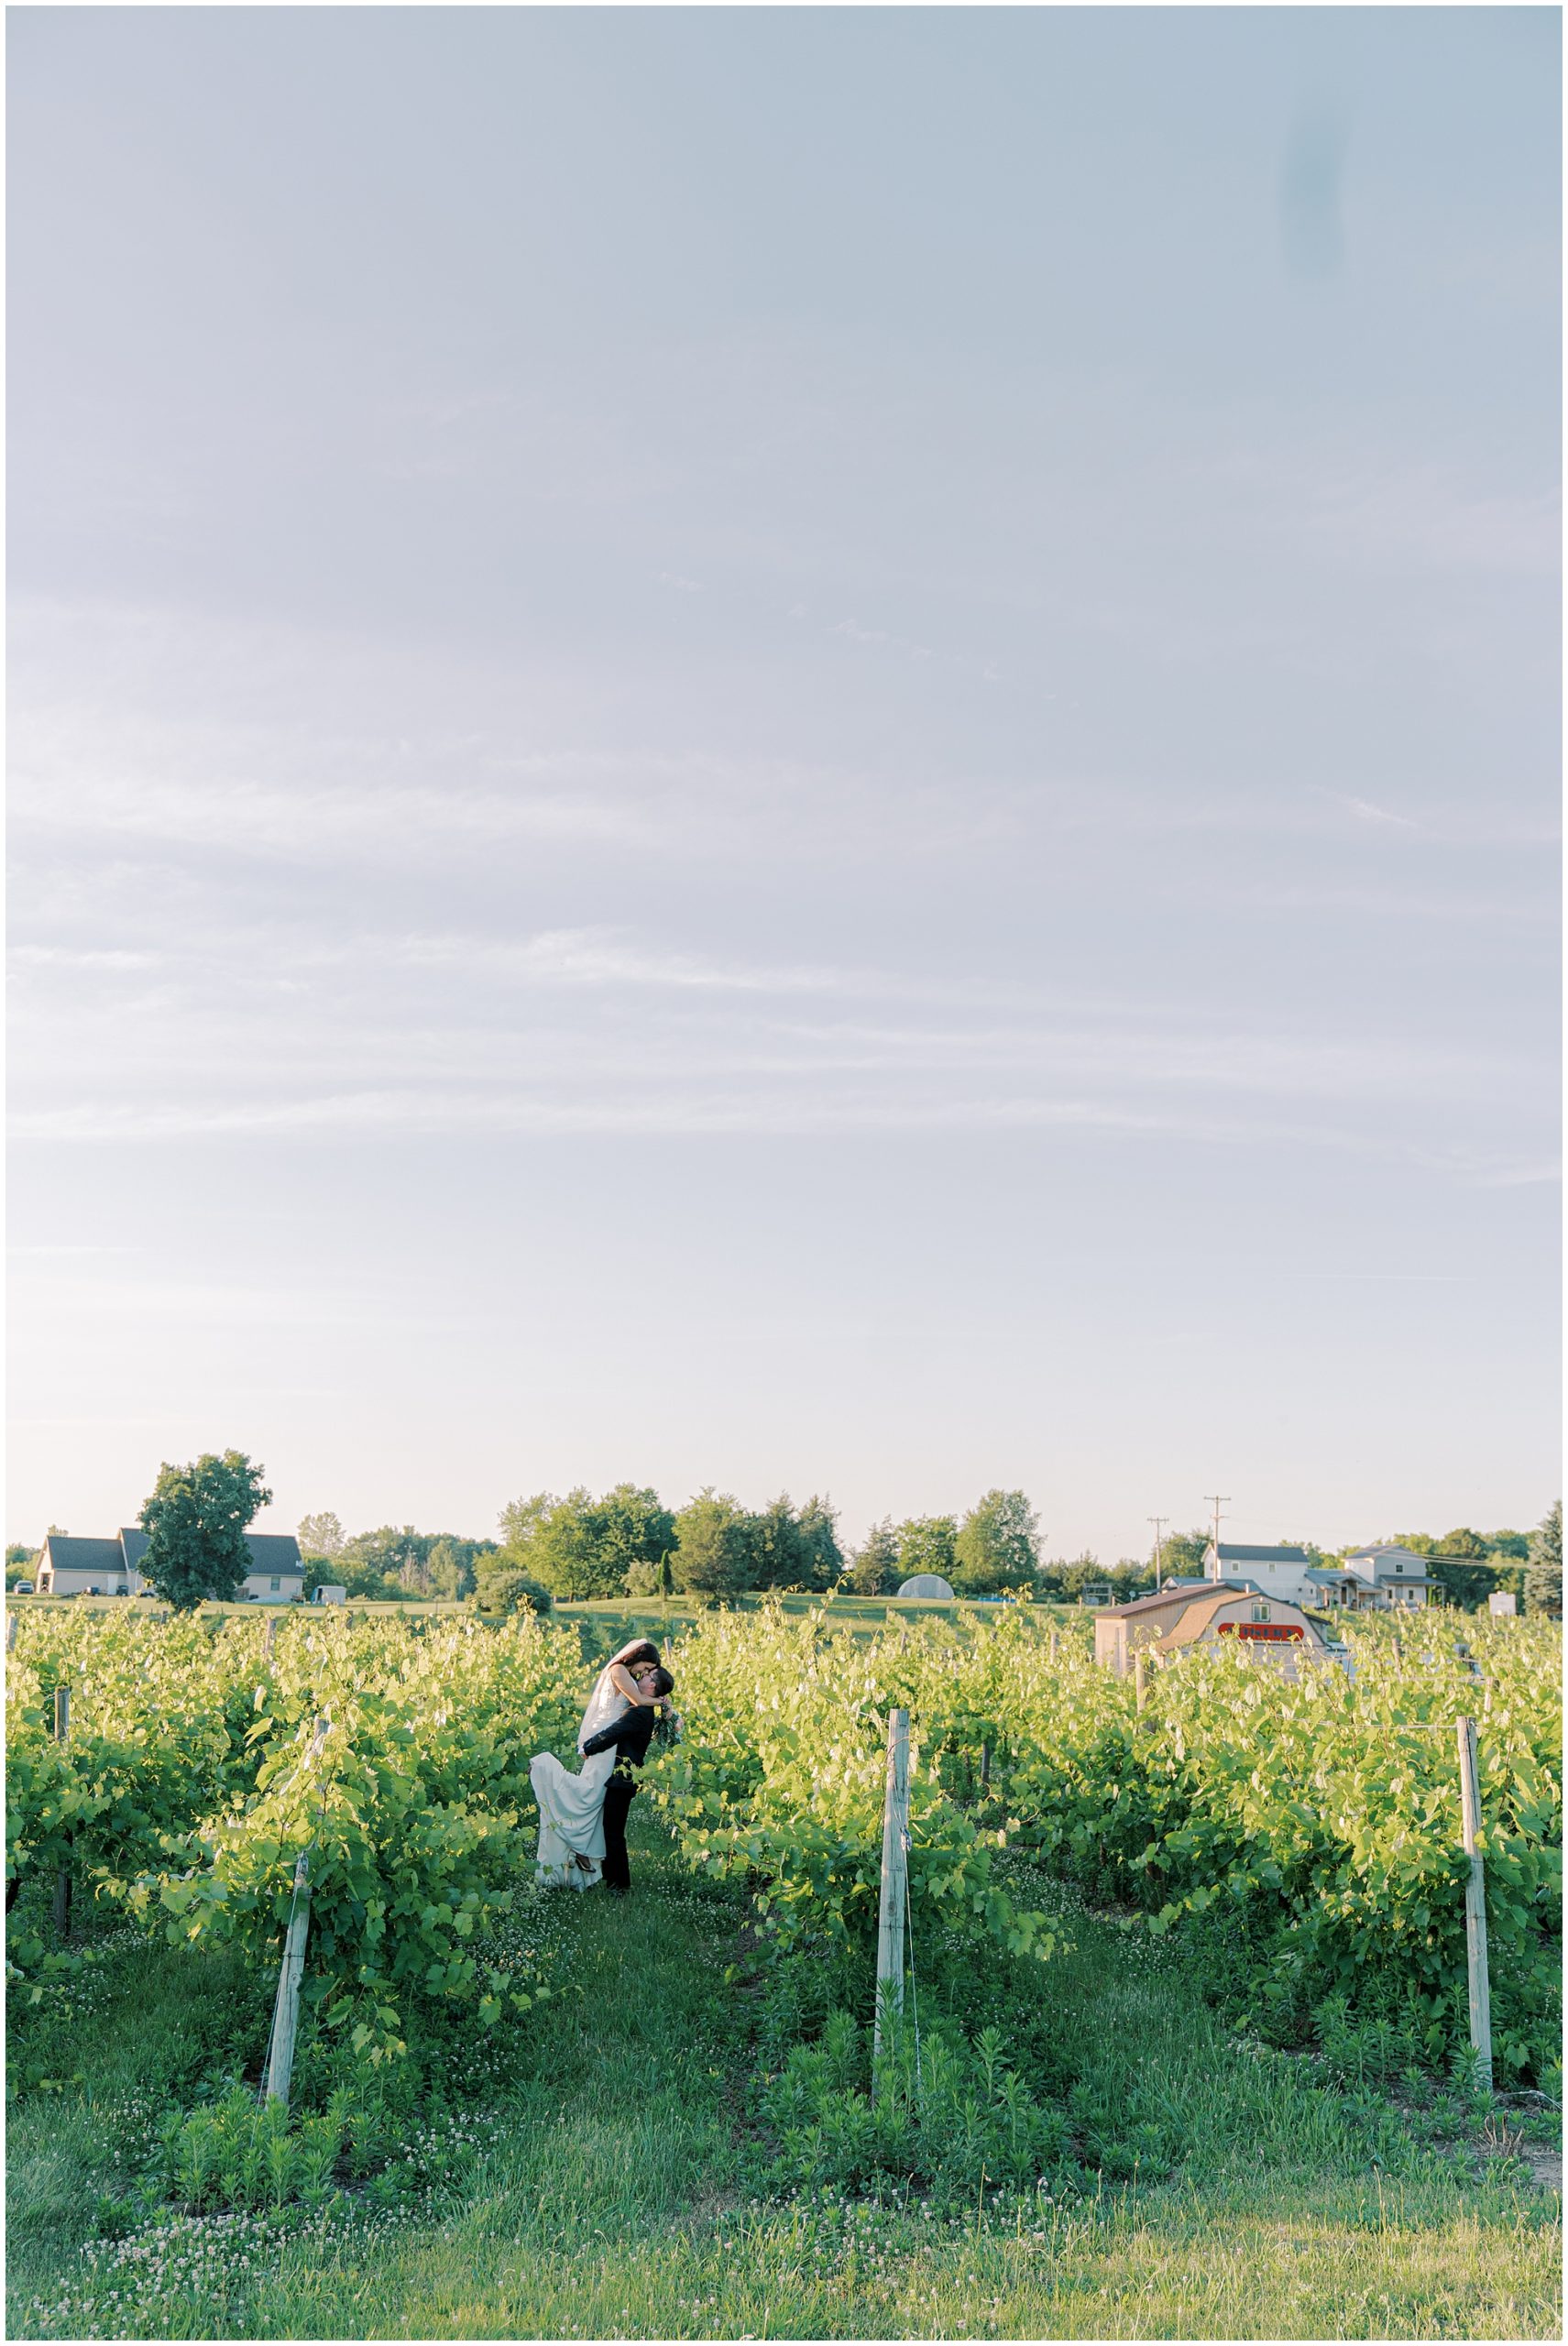 one of my favorite summer wedding themes is a winery wedding